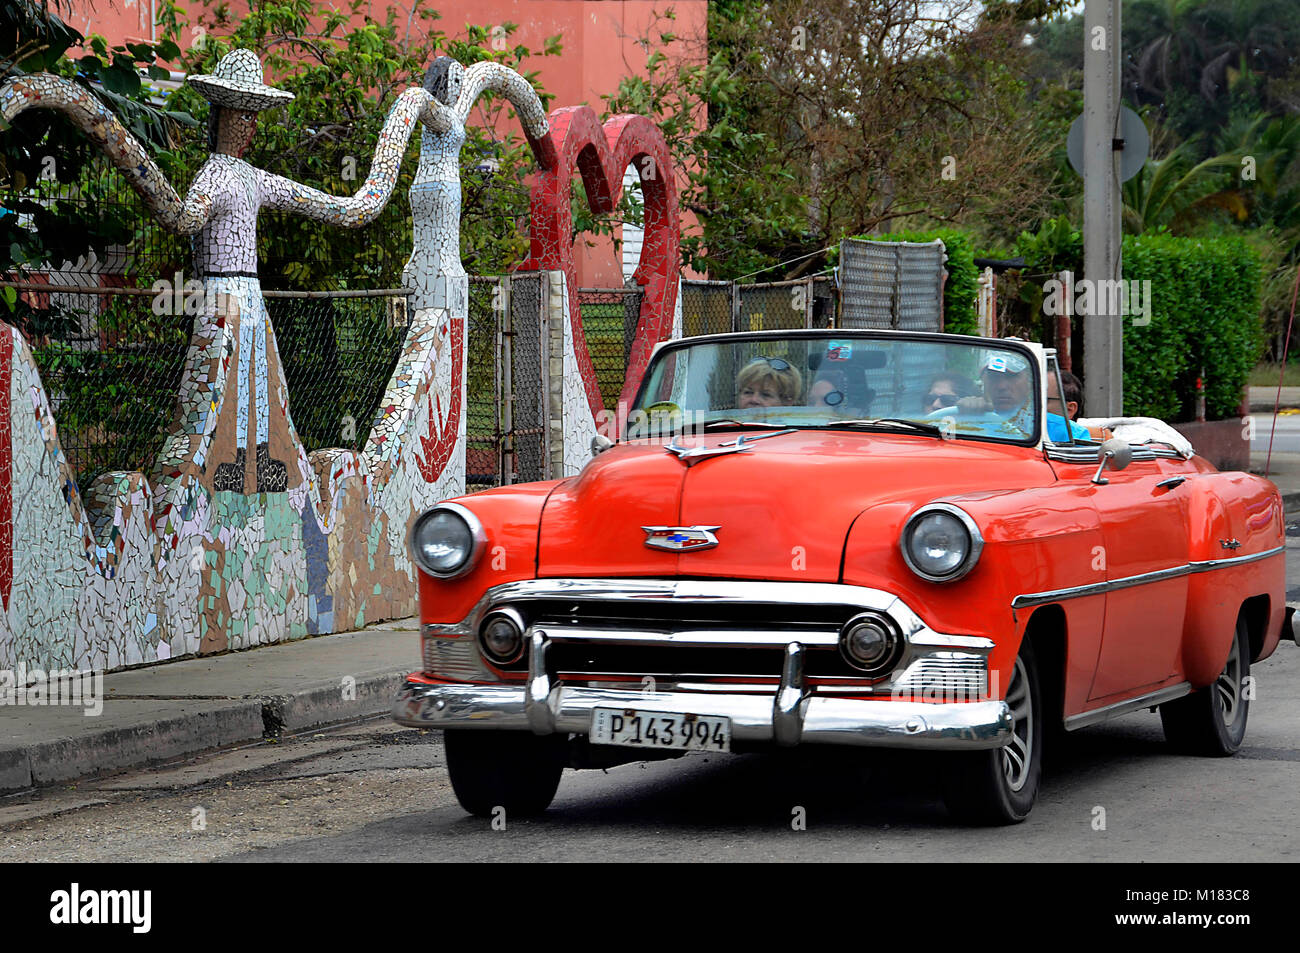 (180129) -- HAVANA, Jan. 29, 2018 (Xinhua) -- A vintage car passes a facade benefited by the community cultural project 'The Joy of Living' headed by the Cuban painter and sculptor Jose Antonio Rodriguez Fuster, in Jaimanitas of Havana, Cuba, on Jan. 25, 2018. Fusterland, a humble neighborhood to the west of Havana transformed from a remote fishing village, has become a hot tourist attraction in recent years thanks to the transformation, and the key to the fundamental change is, to the shock of many, art. Jaimanitas, or what many people call 'Fusterland,' owns its unusual popularity to Cuban p Stock Photo